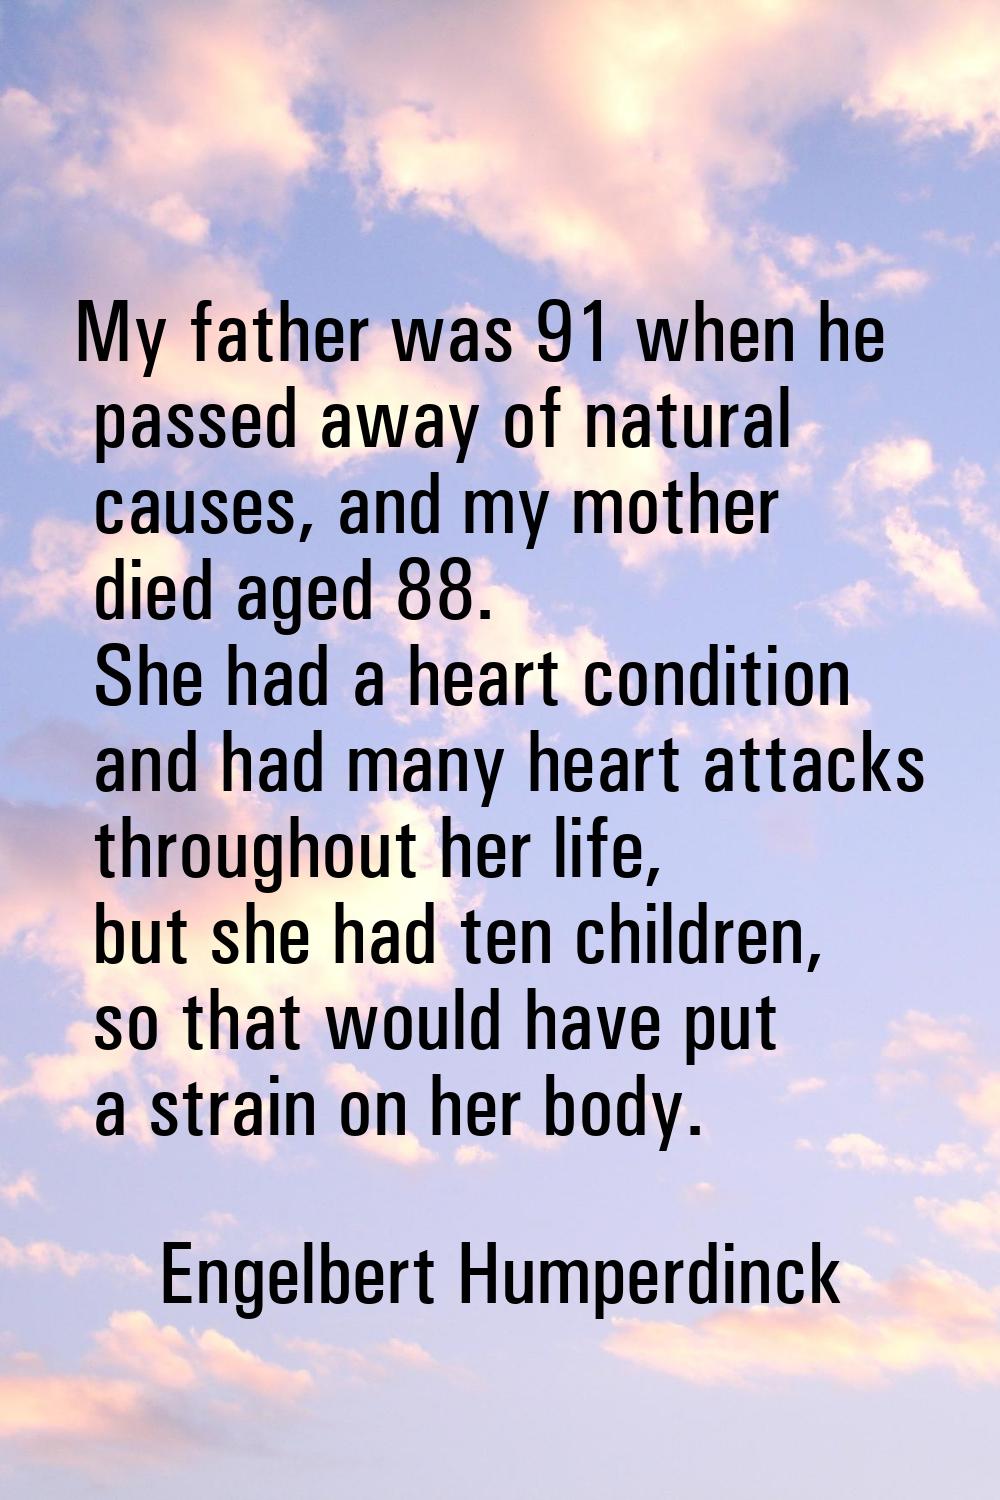 My father was 91 when he passed away of natural causes, and my mother died aged 88. She had a heart